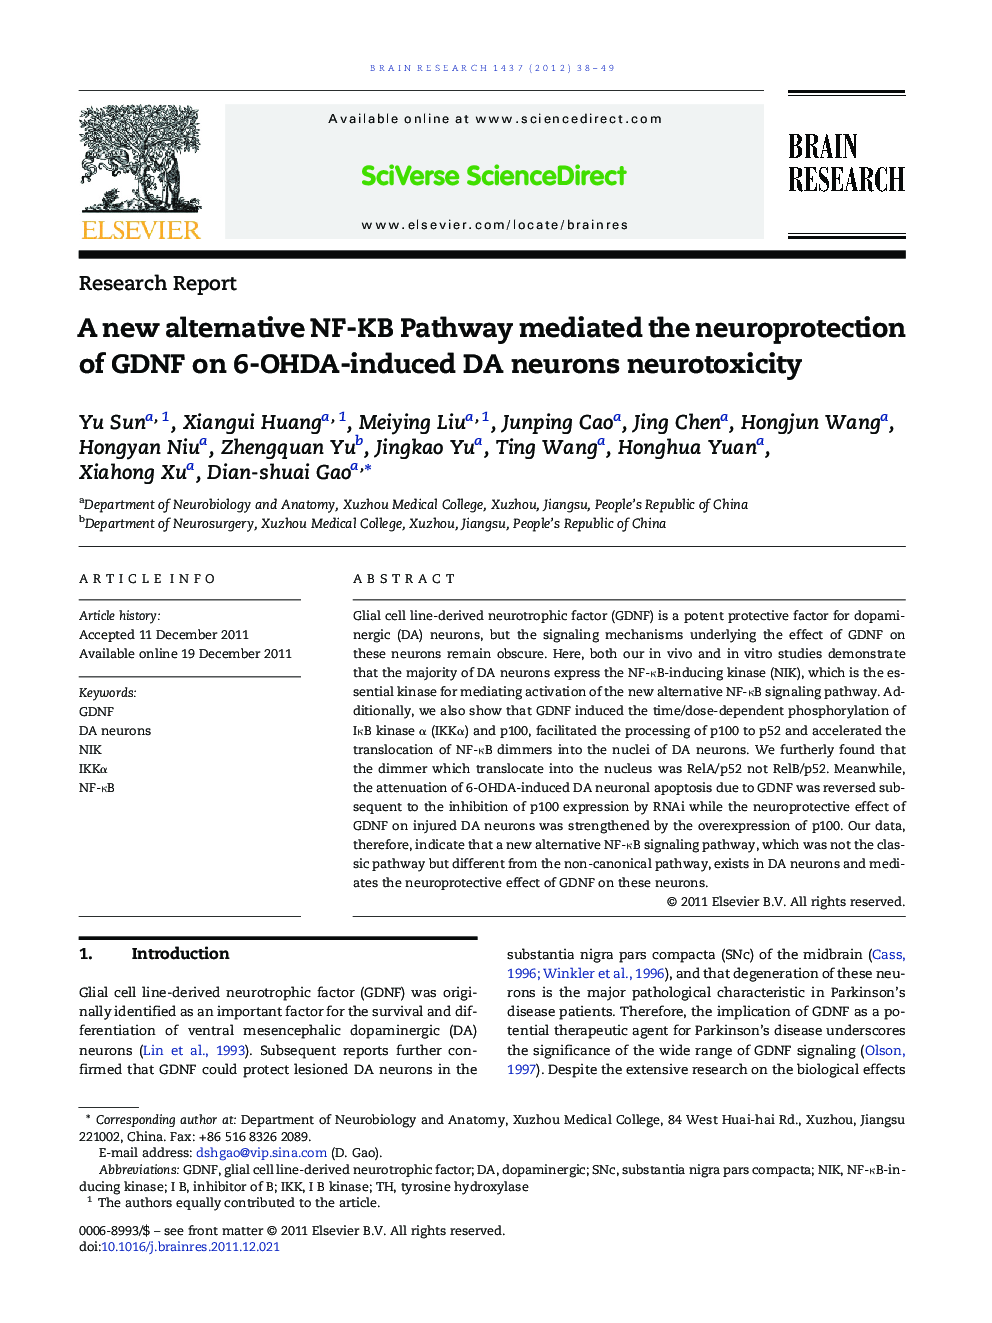 A new alternative NF-ΚB Pathway mediated the neuroprotection of GDNF on 6-OHDA-induced DA neurons neurotoxicity